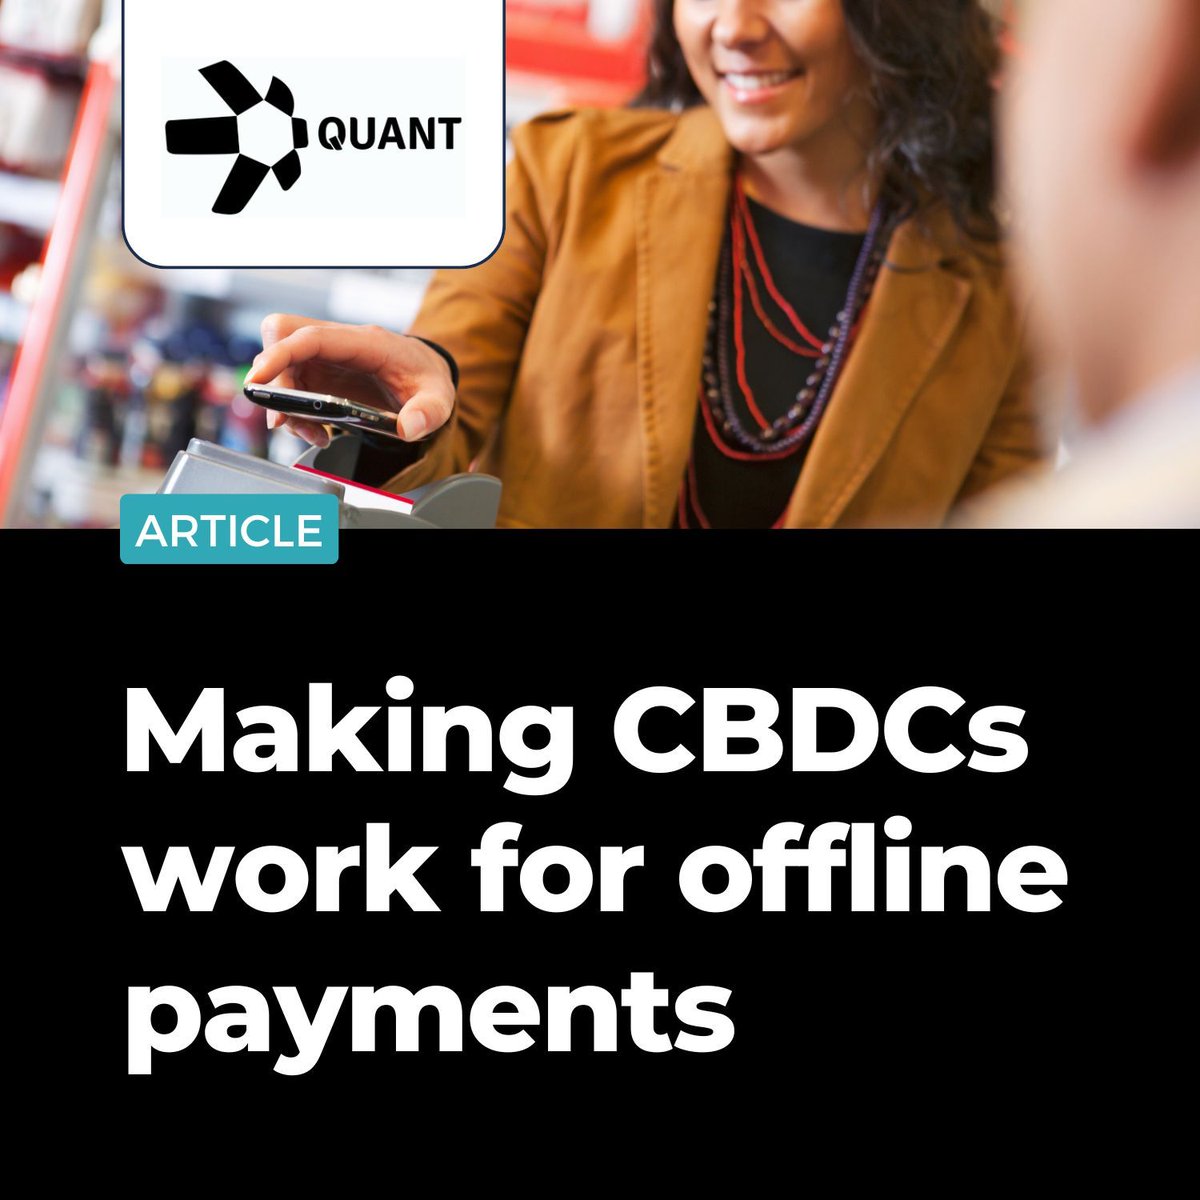 Digital Pound Foundation member, @quant_network, recently published an article exploring some of the key challenges associated with offline payments. Read the article here 👉 buff.ly/3JRBnlx ... #Quant #DigitalPound #CBDC #DigitalCurrency #Payments #Fintech